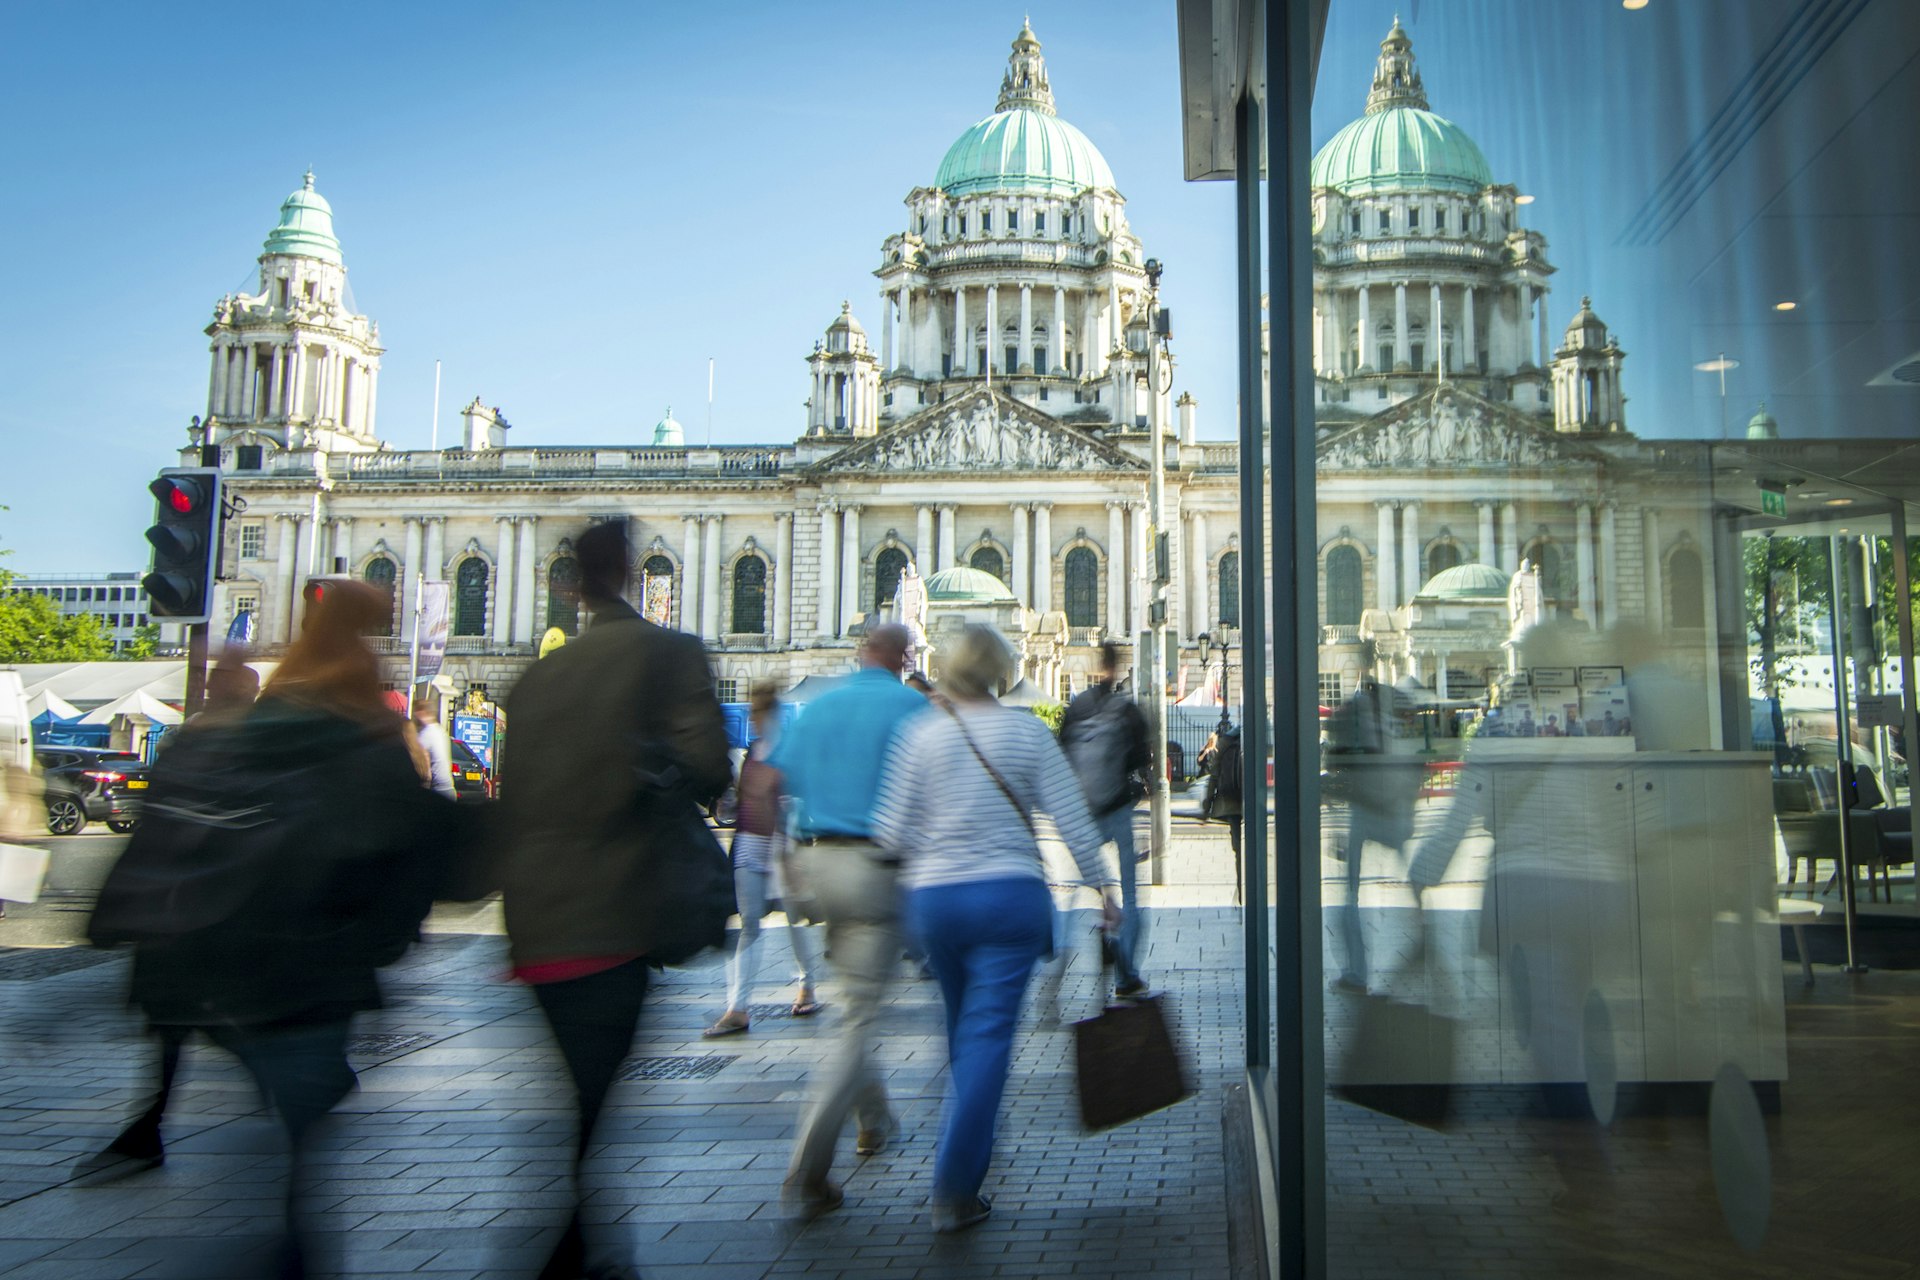 People walking down a pedestrianised street in front of Belfast City Hall